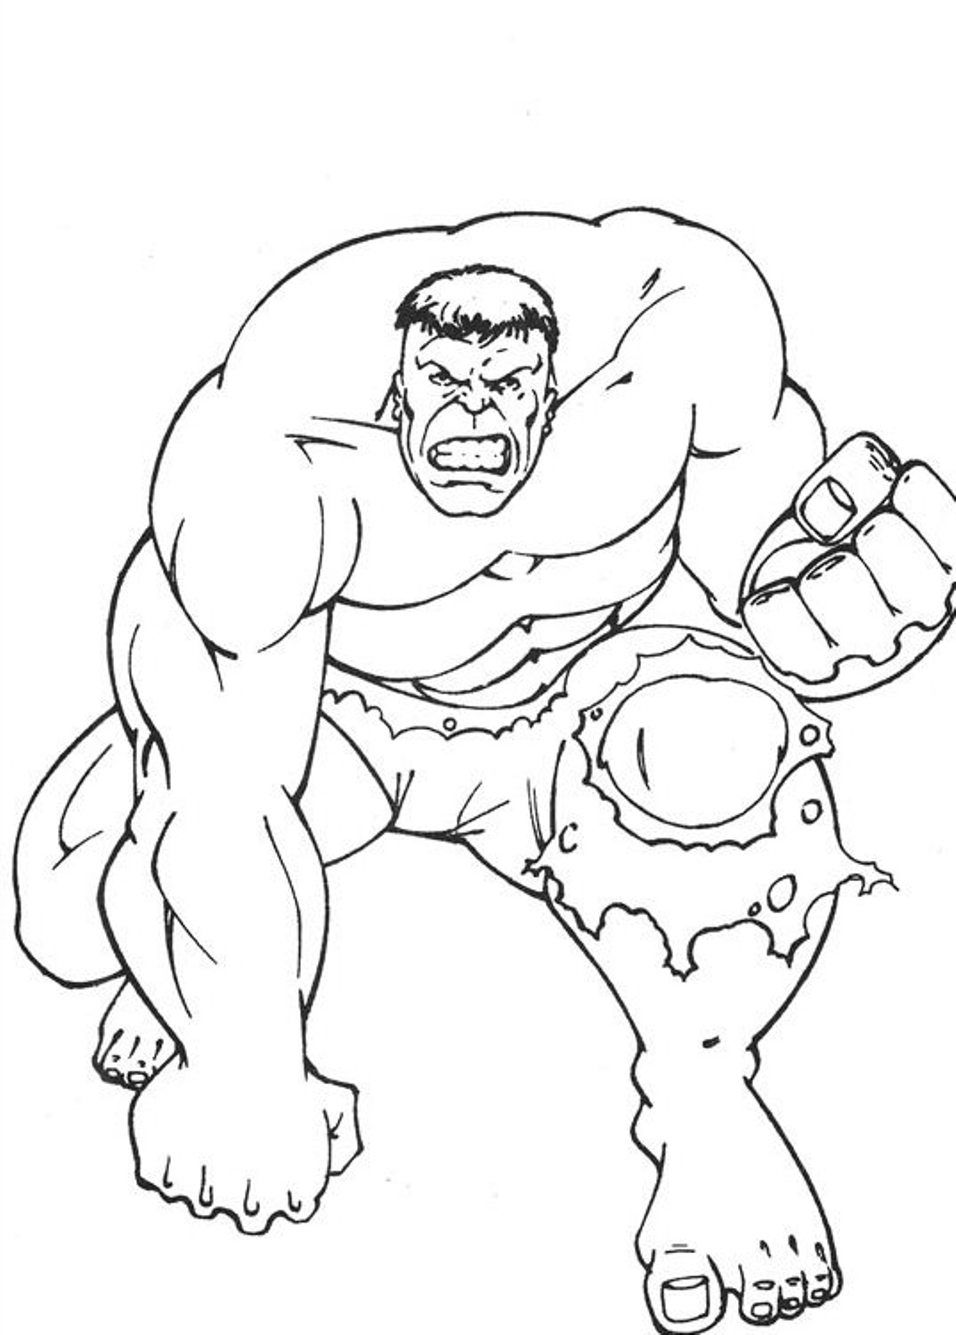 The Avengers Hulk Coloring Pages | Super Heroes Coloring pages of ...